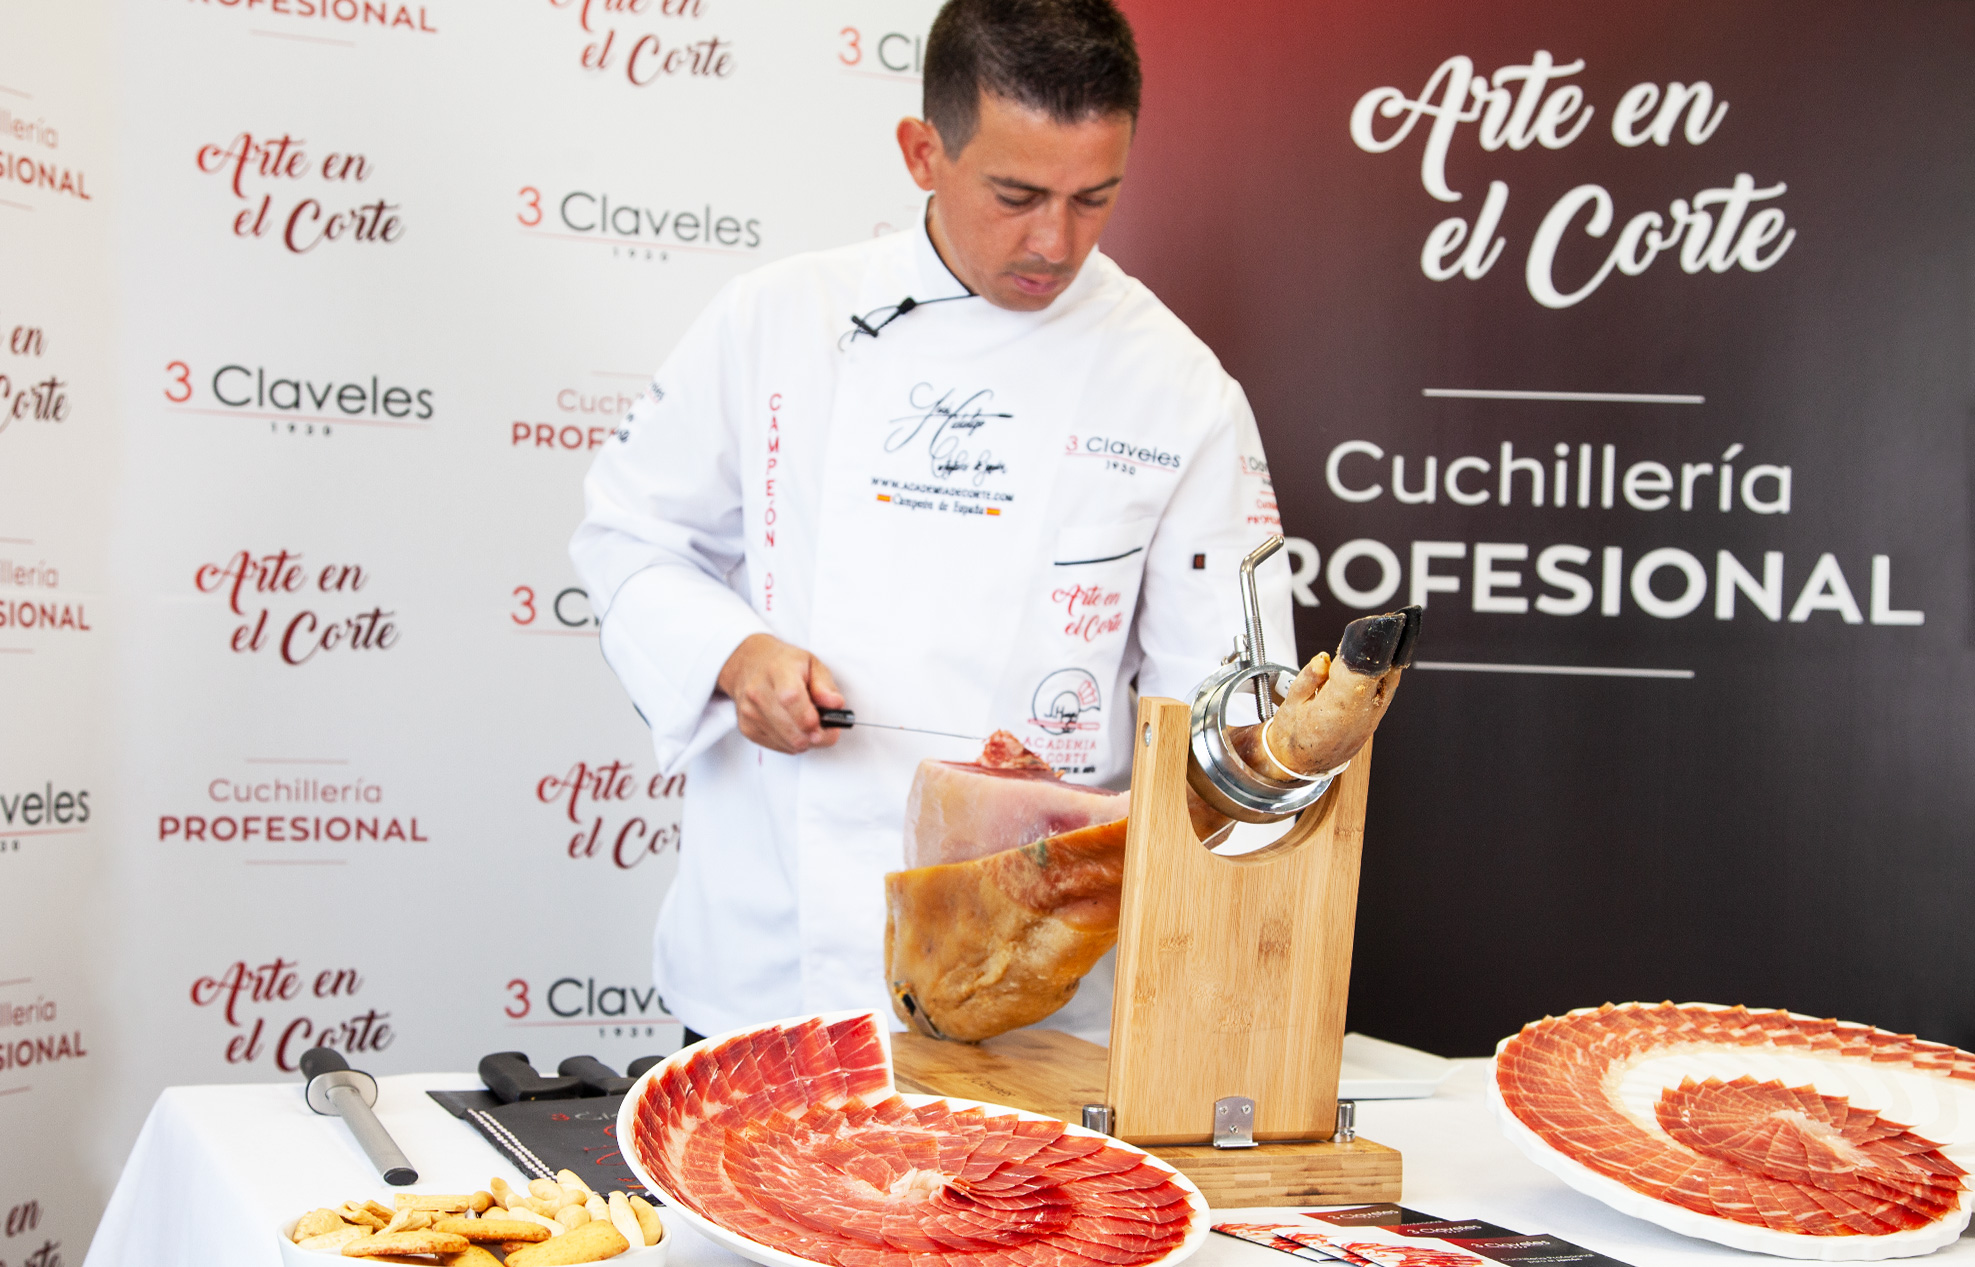 Hidalgo cutting ham with 3 Claveles knives